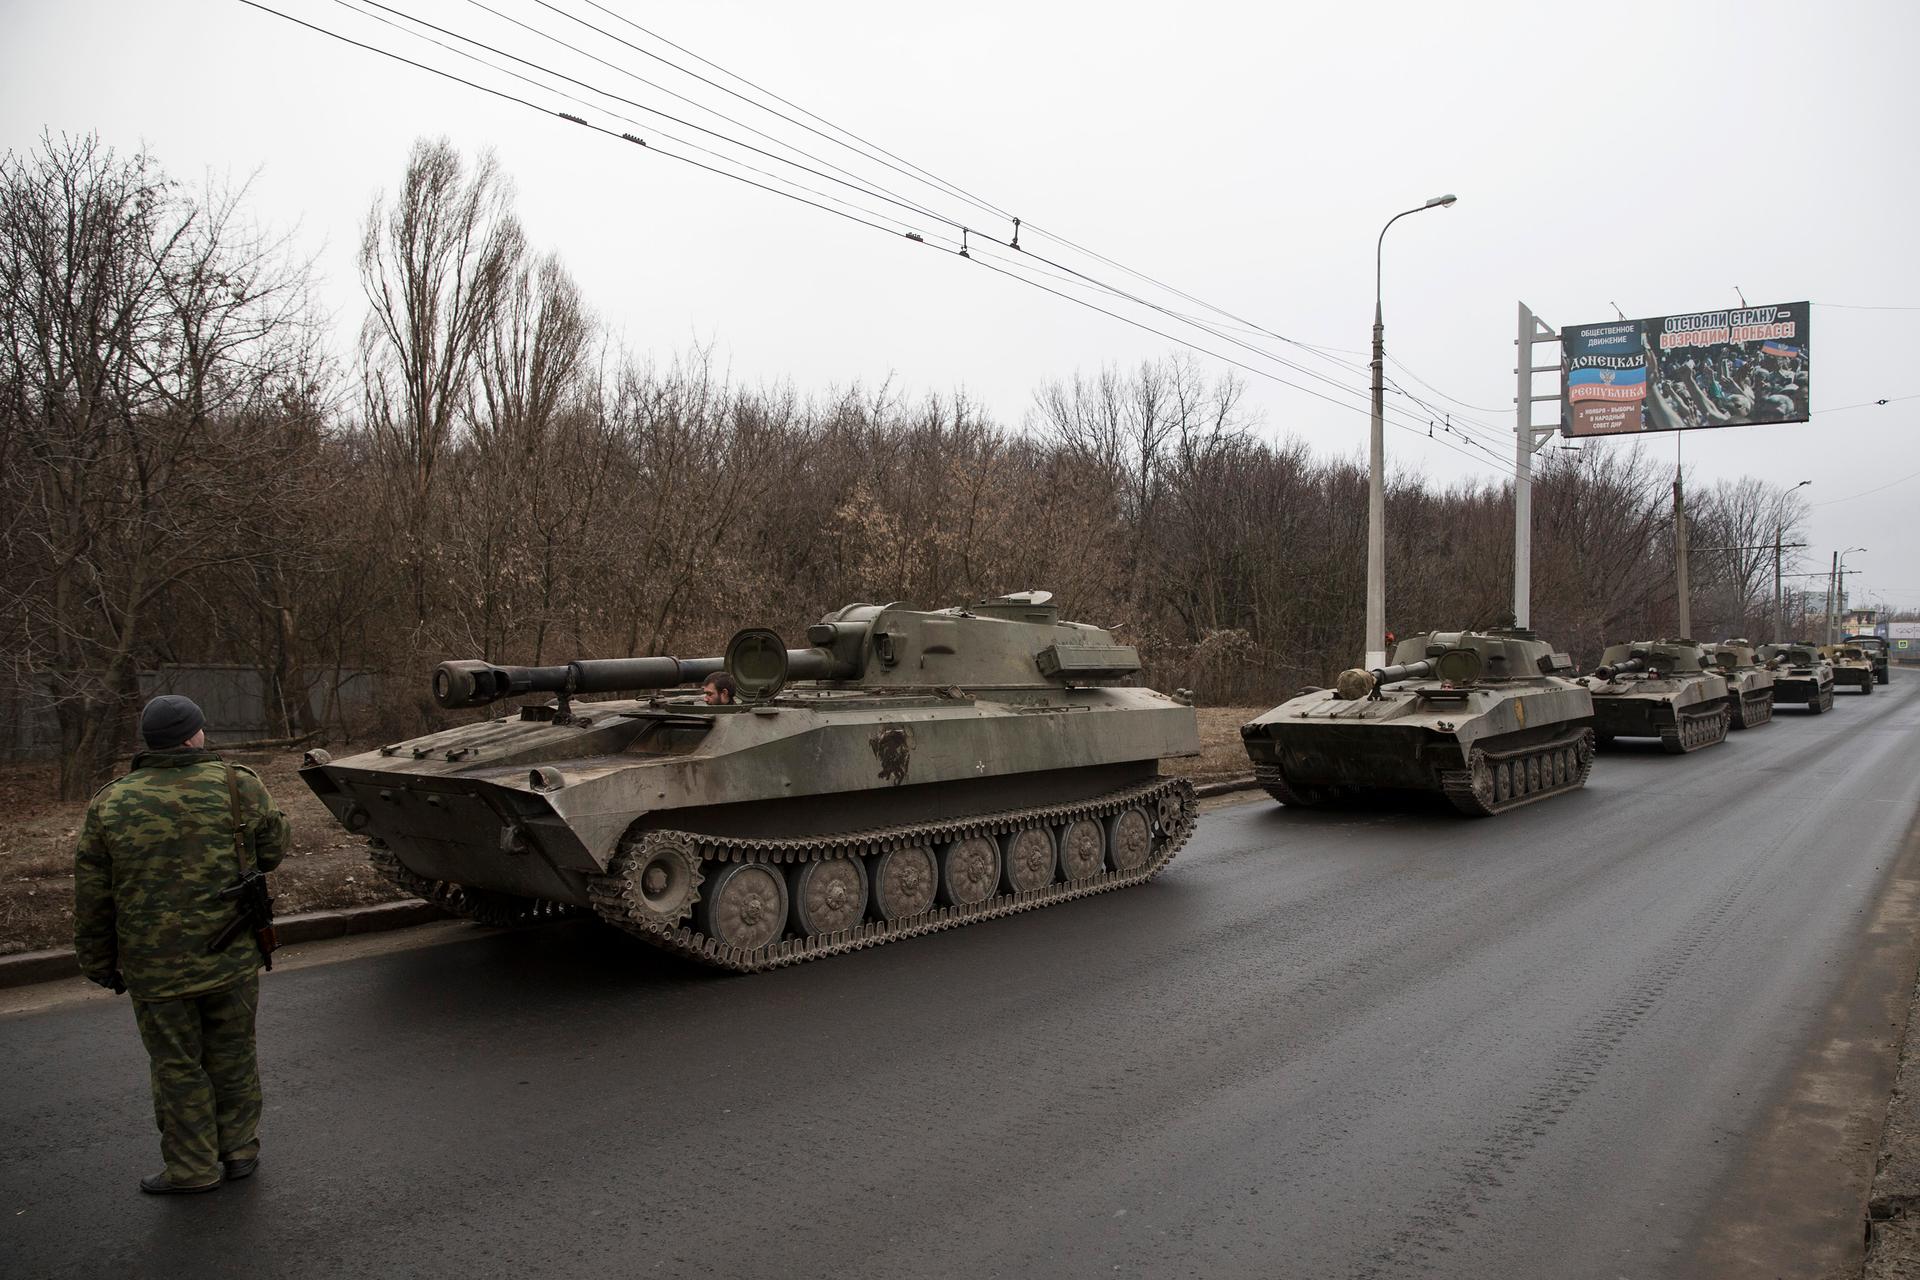 A convoy of self-propelled artillery guns on the move near Donetsk on February 26, 2015. Heavy weapons like these are reported to be concentrating near Mariupol.